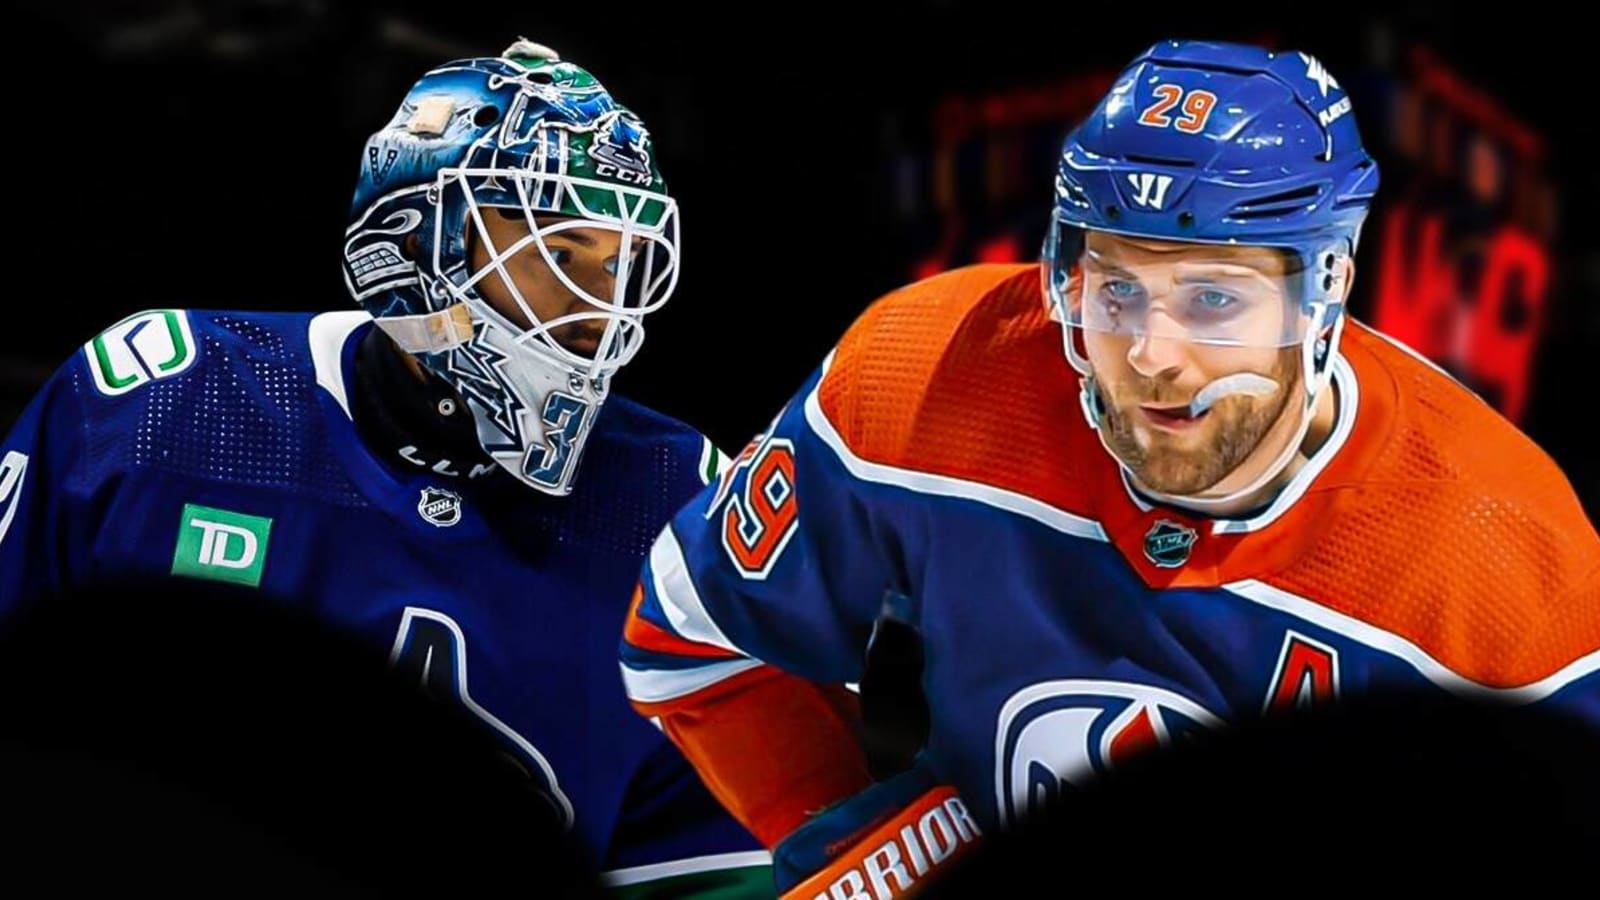 Canucks’ Arturs Silvos fires savage shot at Oilers’ Leon Draisaitl after Game 3